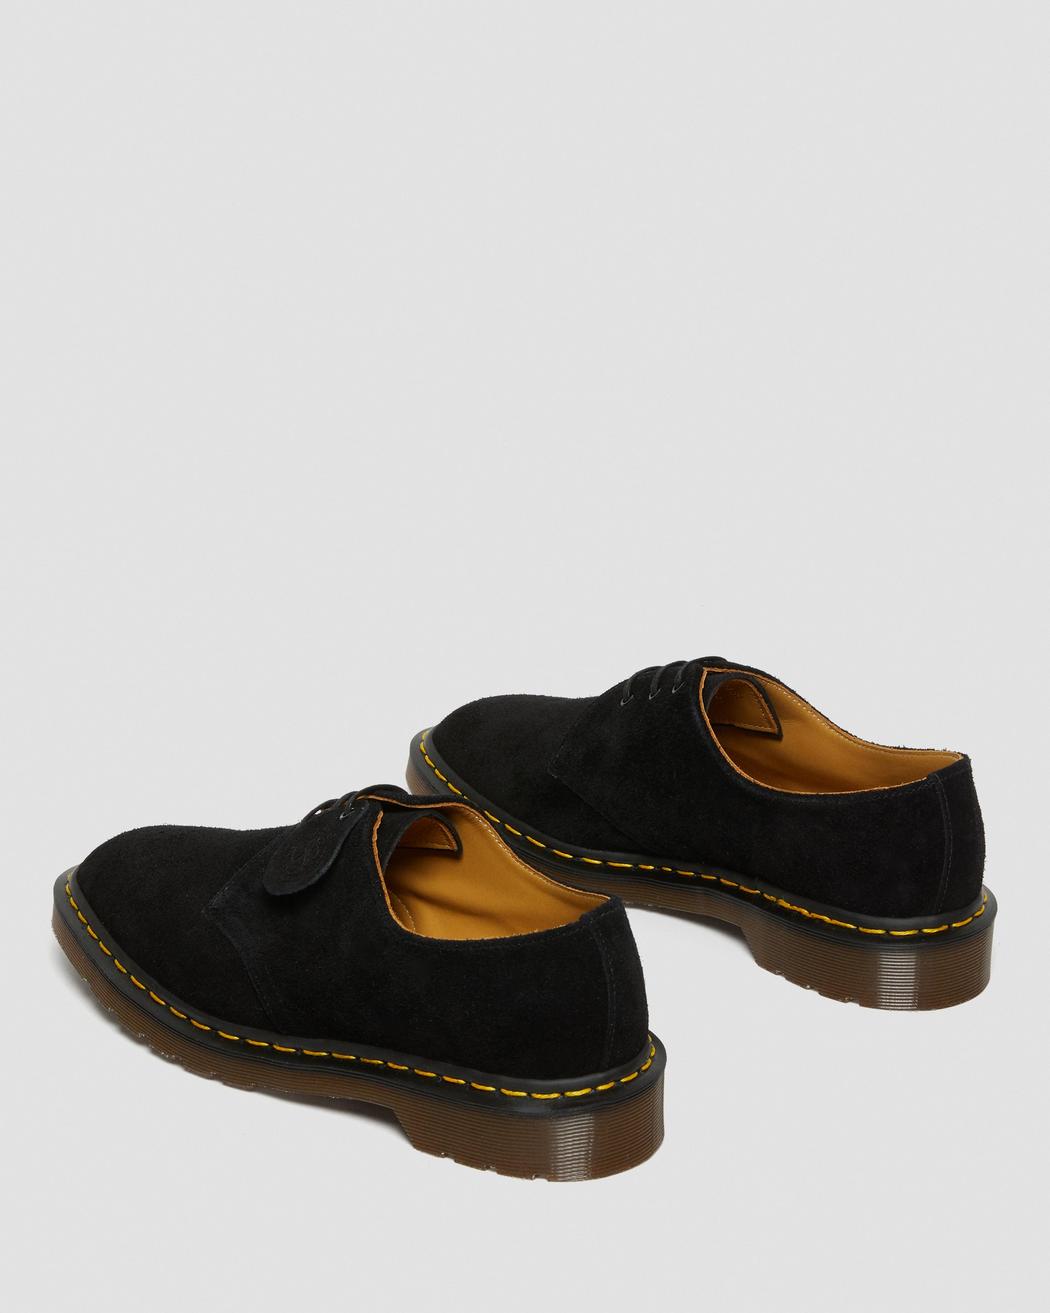 1461 Made In England Suede Oxford Shoes | Dr. Martens